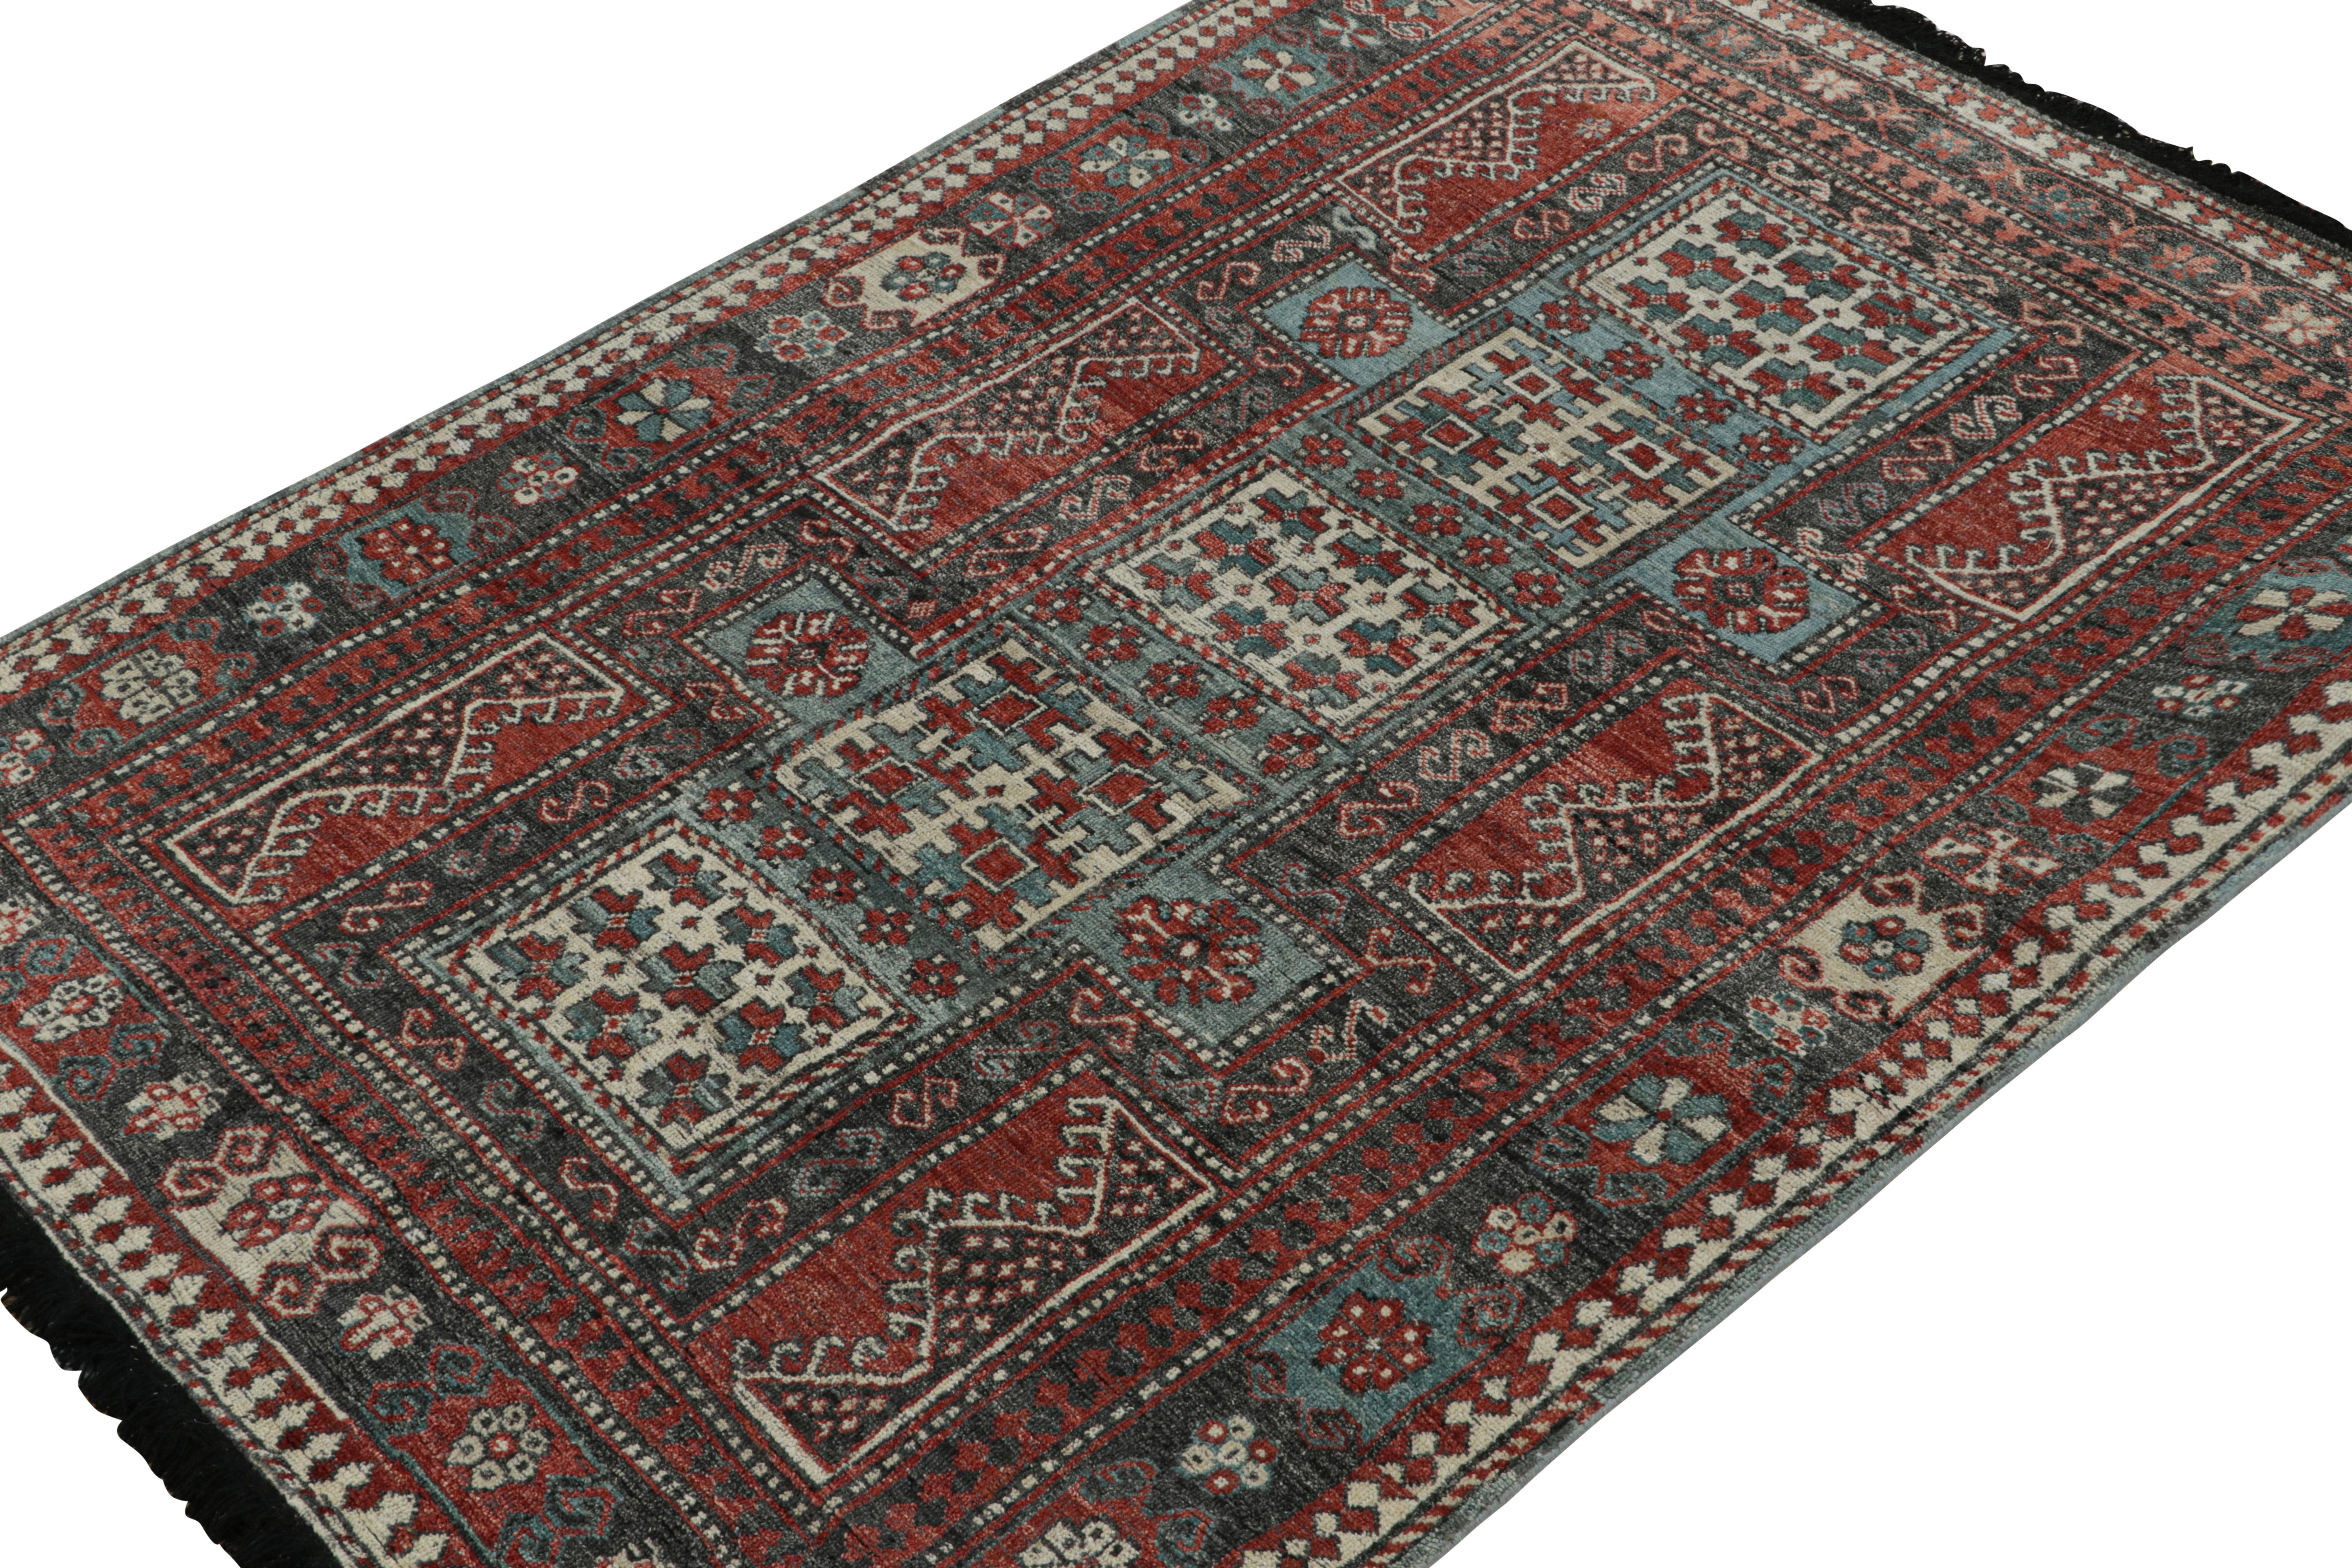 This 5x7 rug is a grand new entry to Rug & Kilim’s Burano collection. Hand-knotted in Persian wool.

Further on the Design: 

Inspired by antique tribal rugs, this rug revels in blue, red & black with defined movement and traditional sensibility.